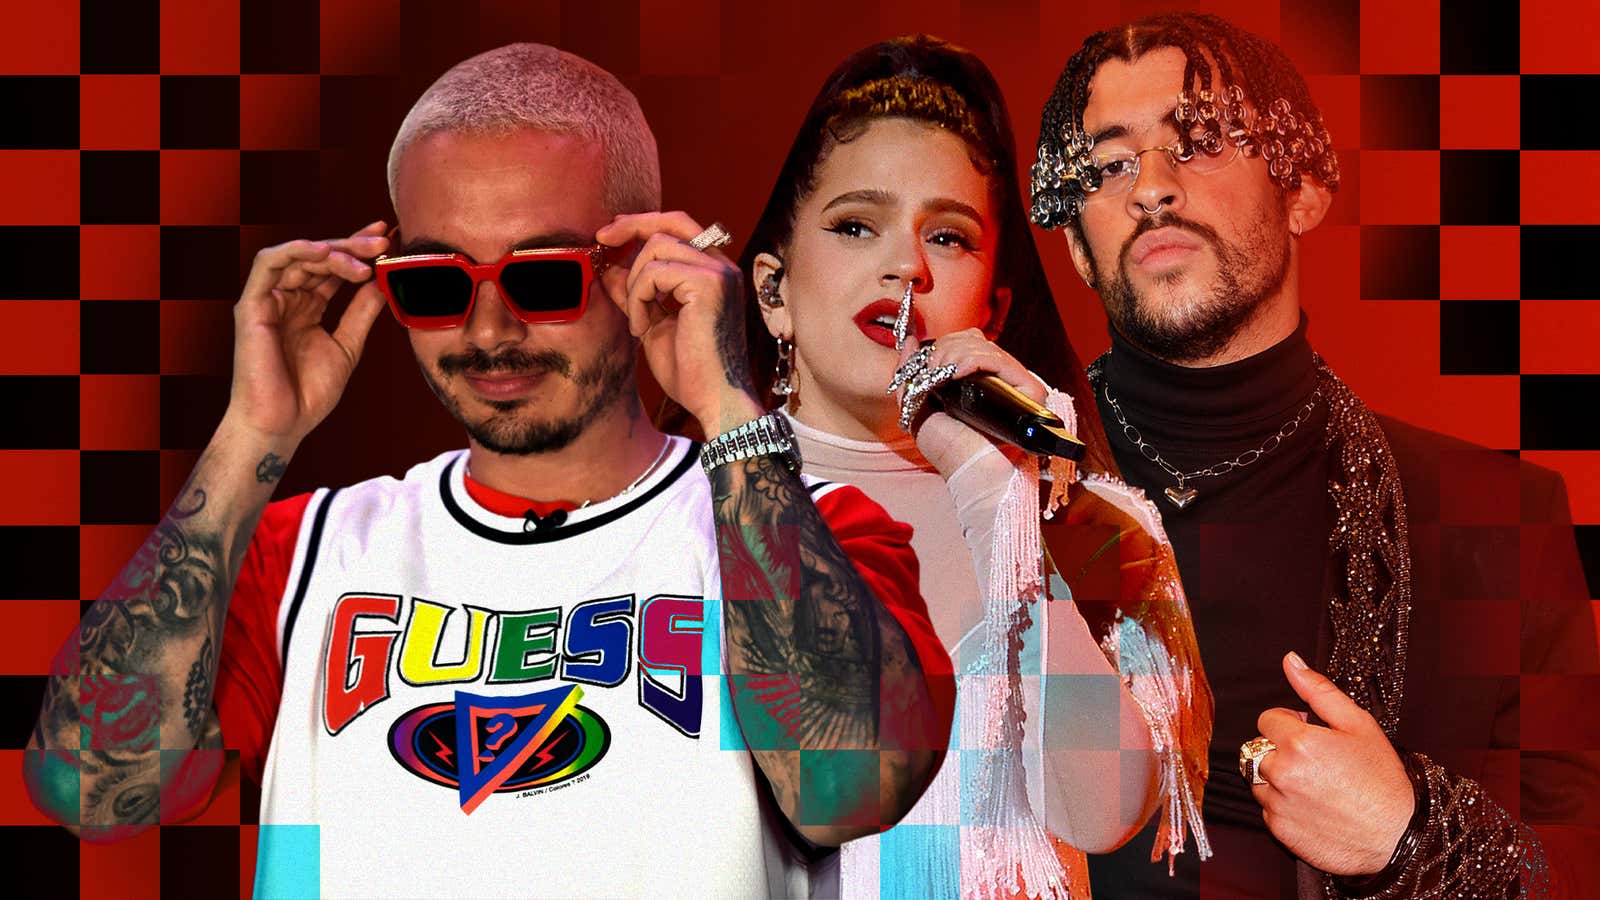 From left: J Balvin (Photo: Alfredo Estrella/Getty Images), Rosalía (Photo: John Shearer/Getty Images), Bad Bunny (Photo: Amy Sussman/BBMA2020/Getty Images for dcp)